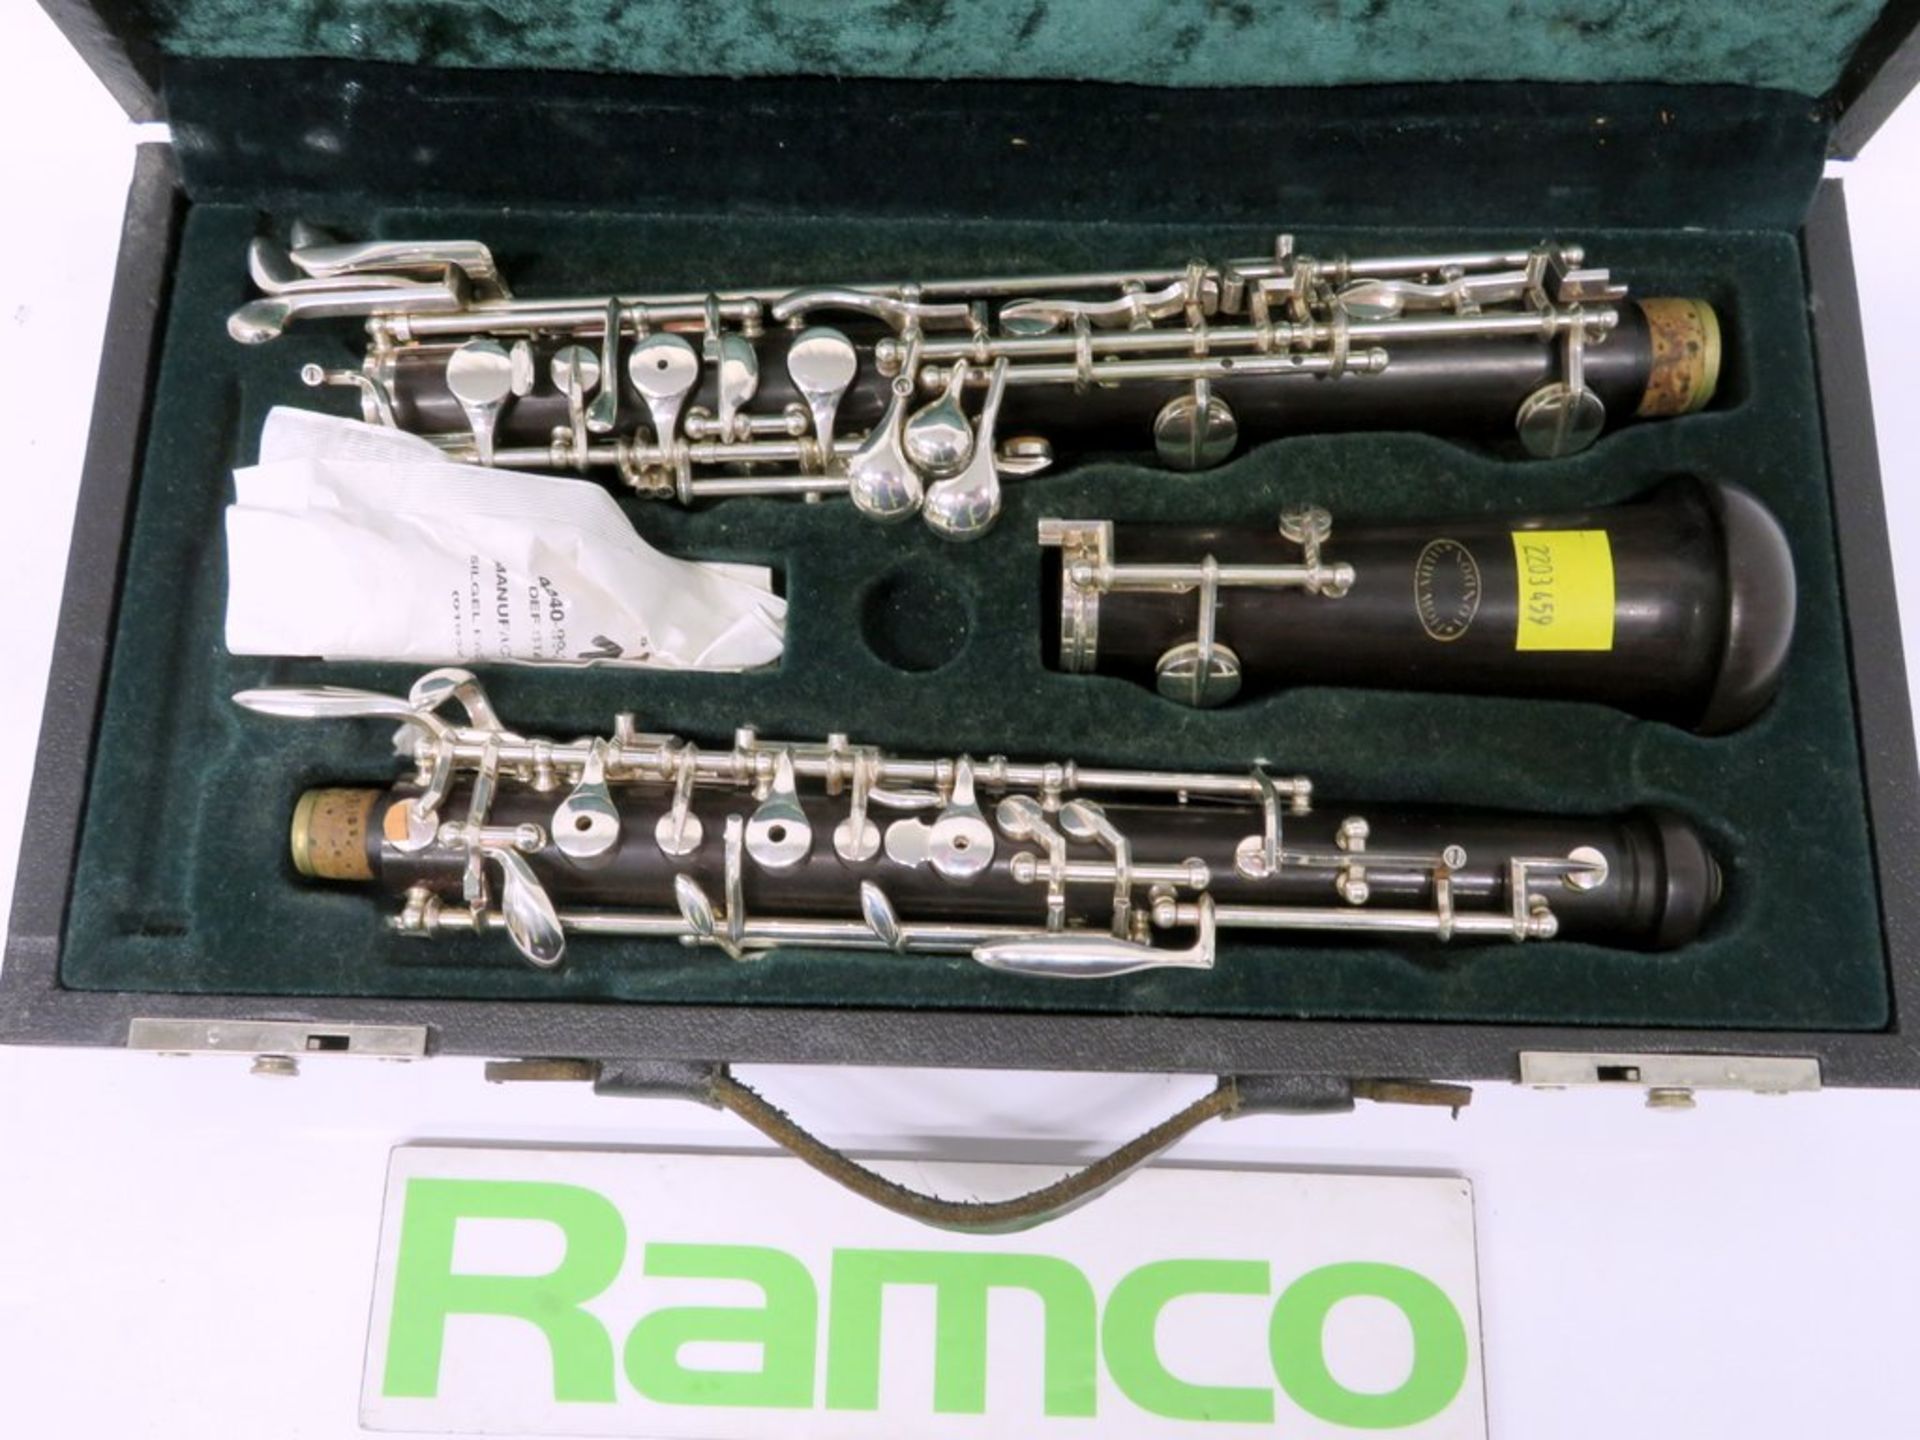 Howarth Of London S40c Oboe Complete With Case. - Image 2 of 20